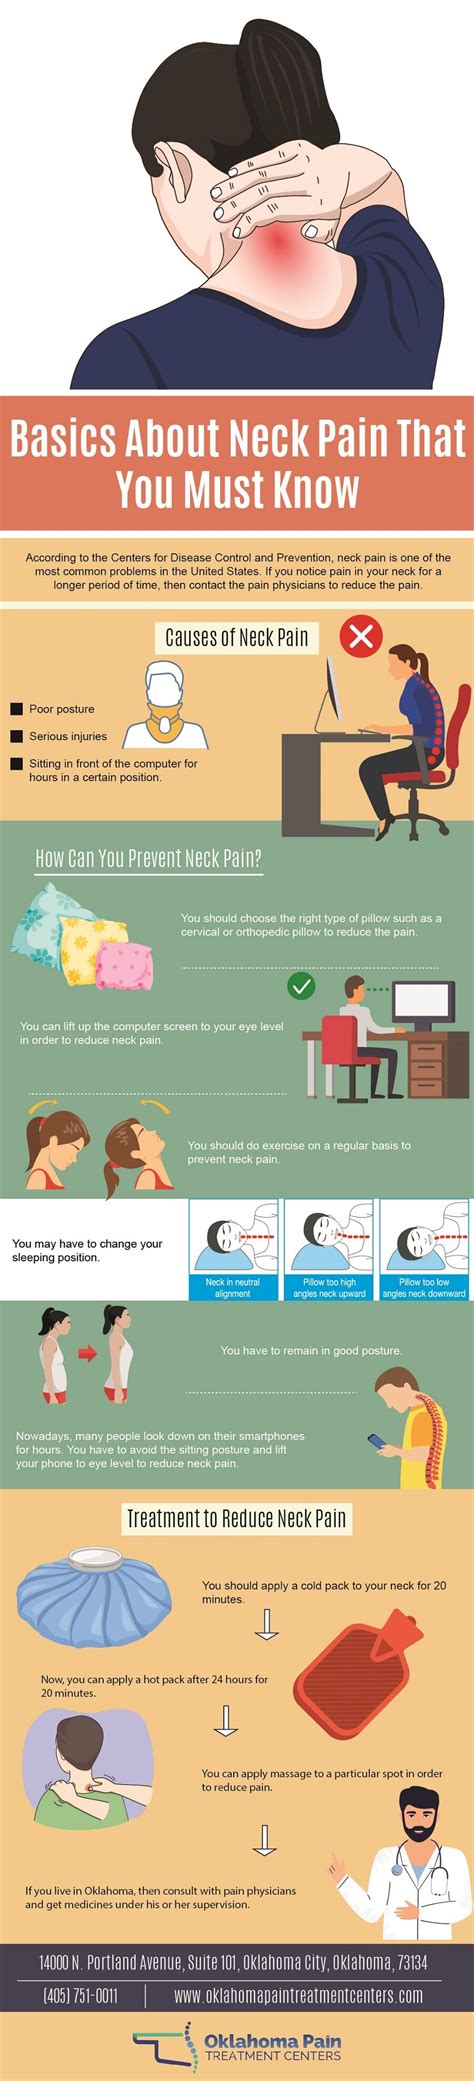 Basics About Neck Pain That You Must Know Infographic